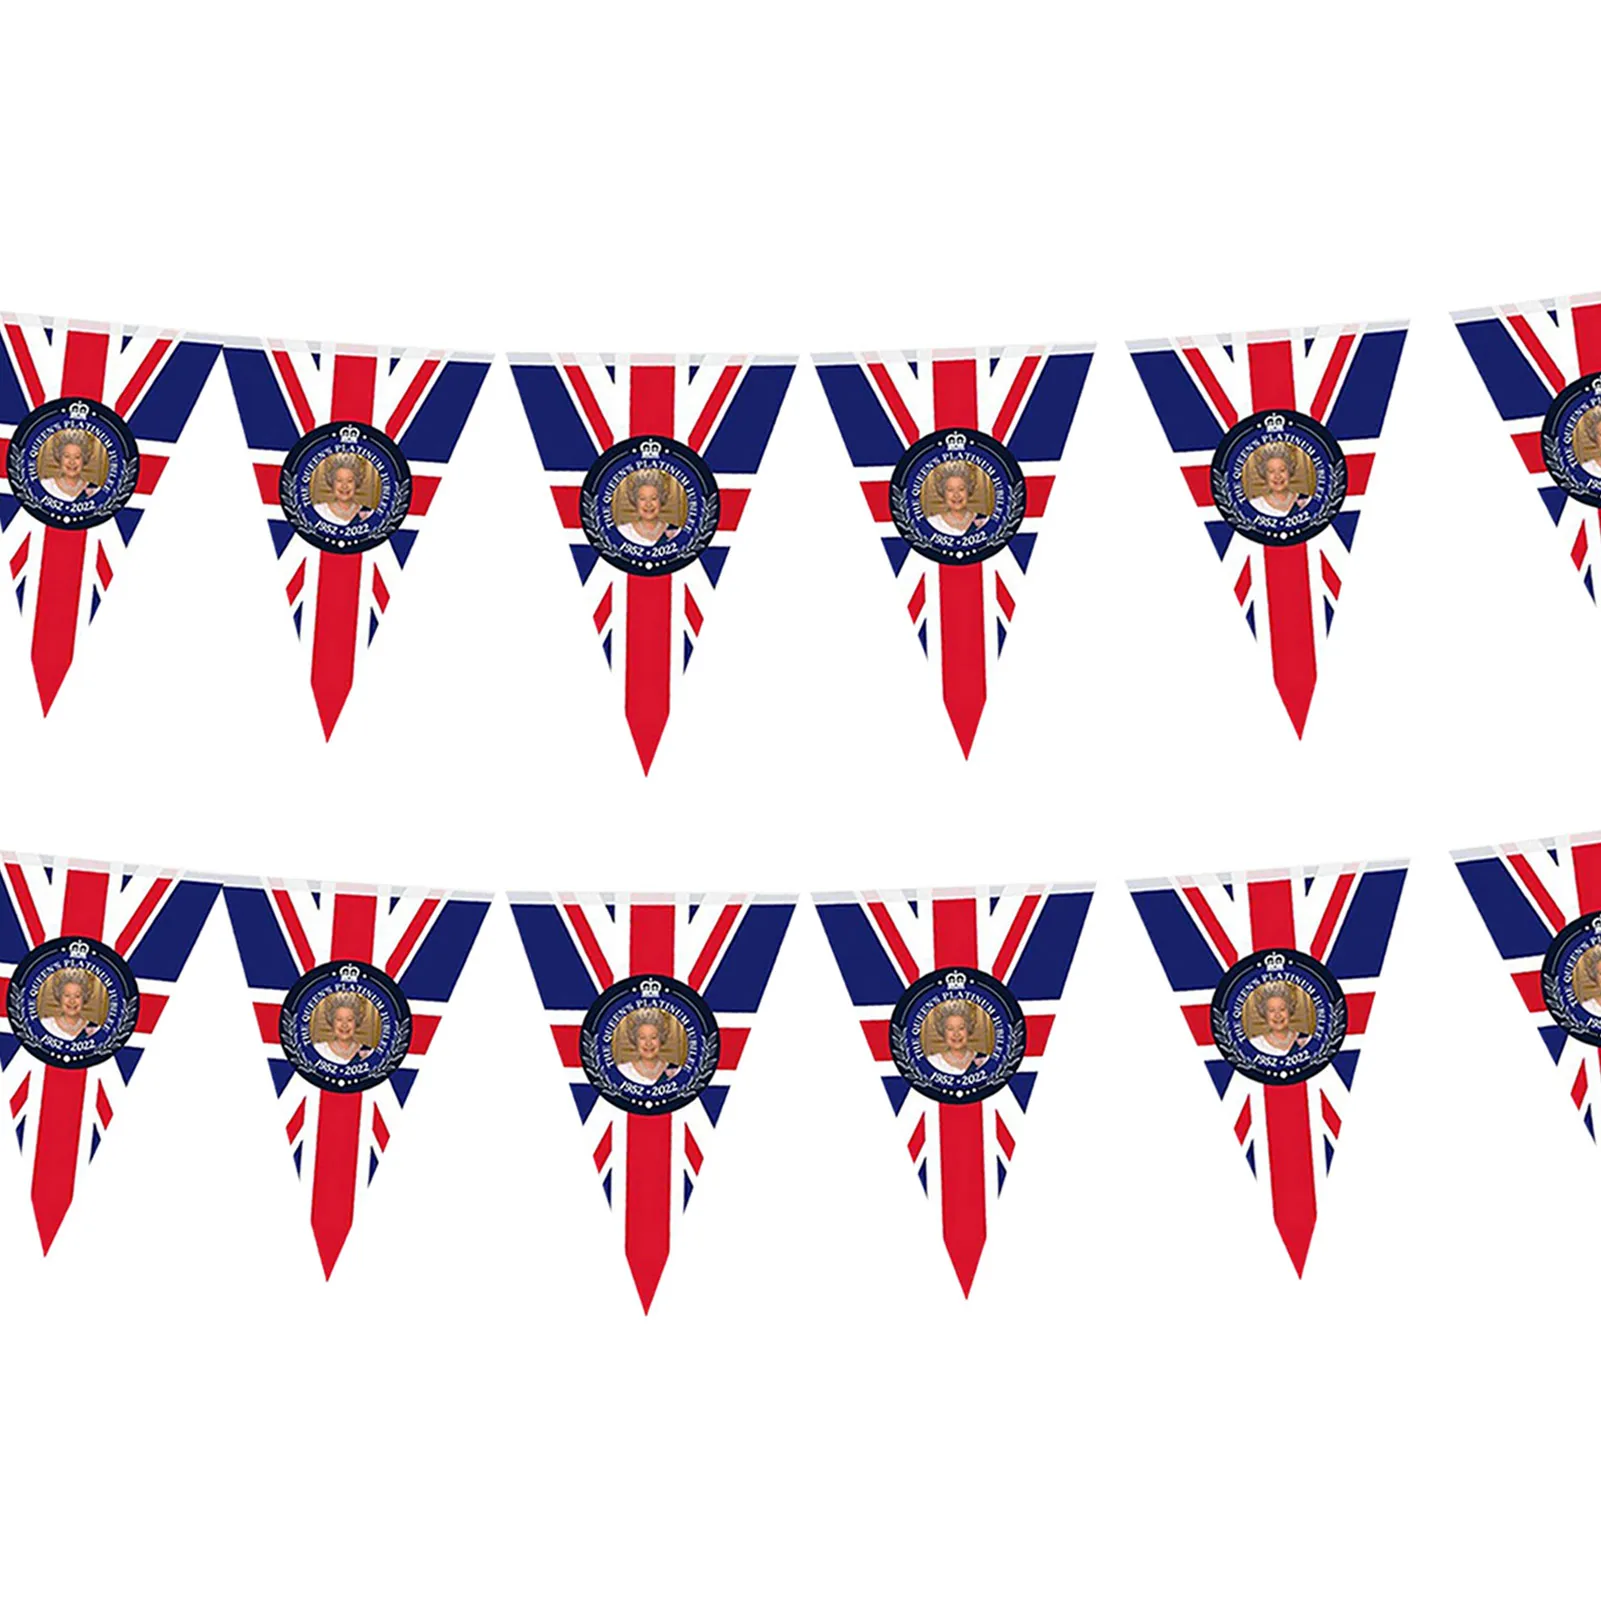 

Queens Jubilee Flag Union Jack 70 Years Queen Platinums Jubilee 2022 Full Flag Patriotic UK United Kingdom Themed Bunting Banner